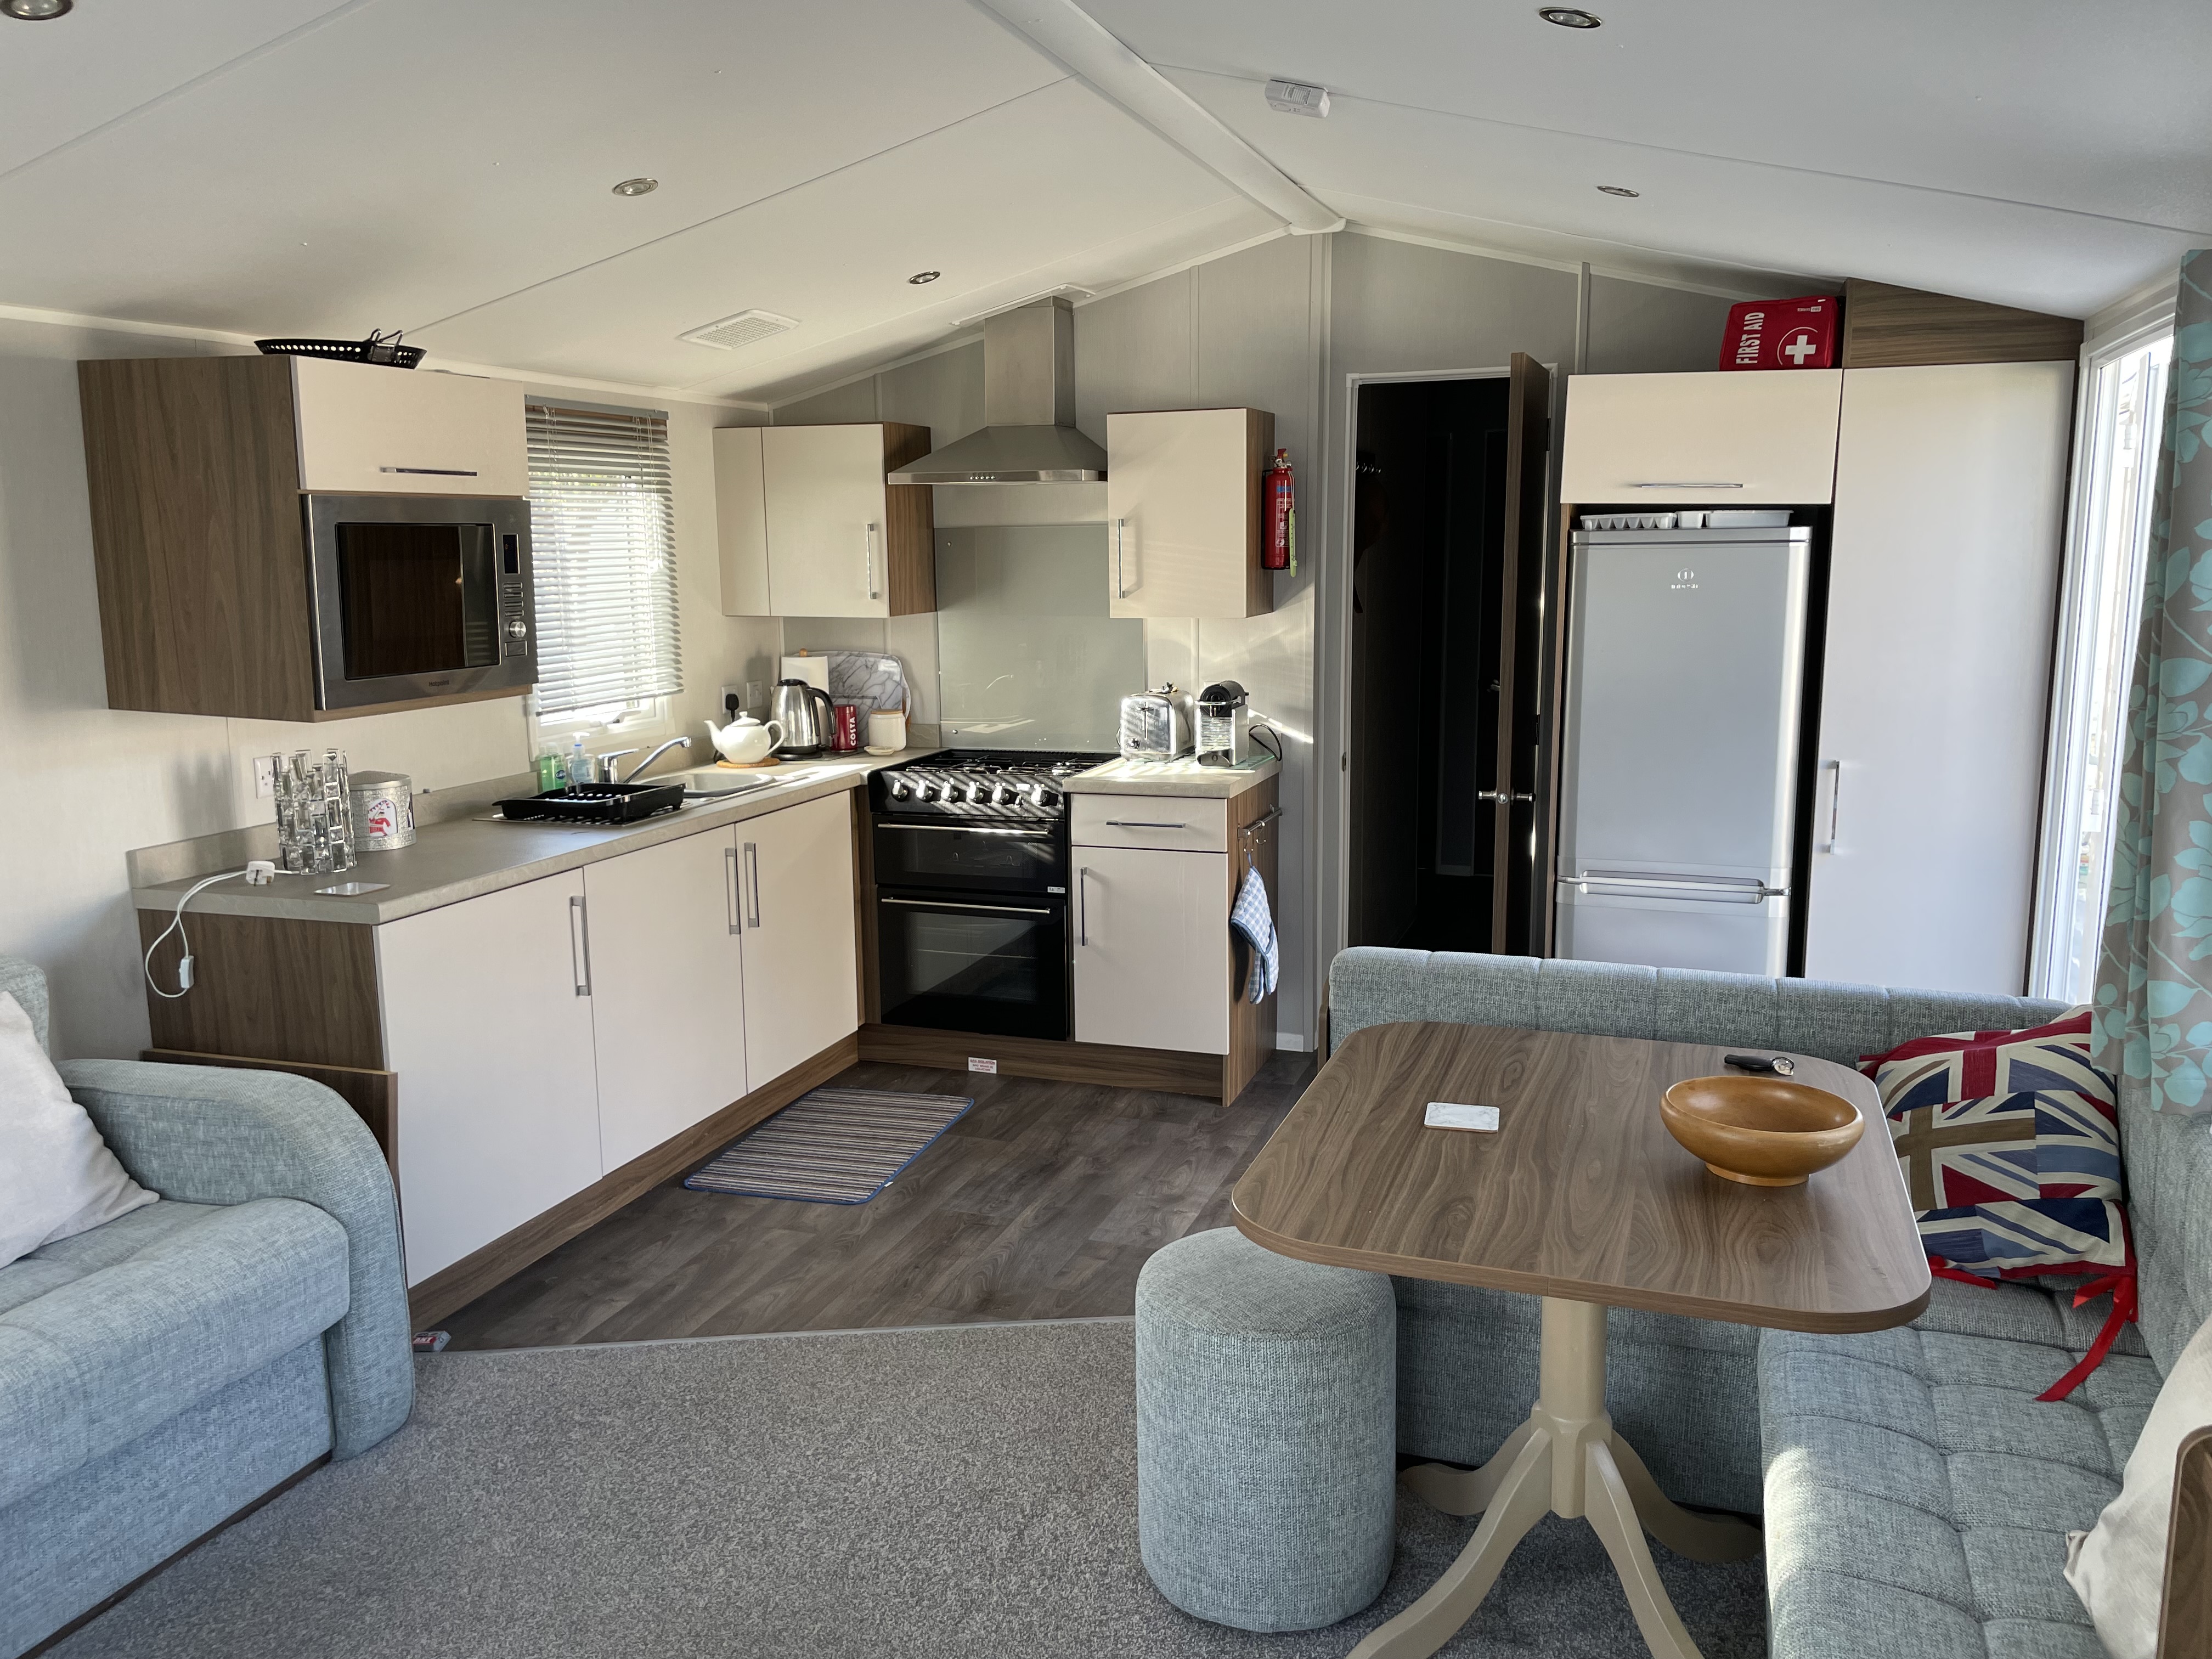 Picture of Willerby Seasons 3 bedroom 8 berth At Kiln Park Tenby